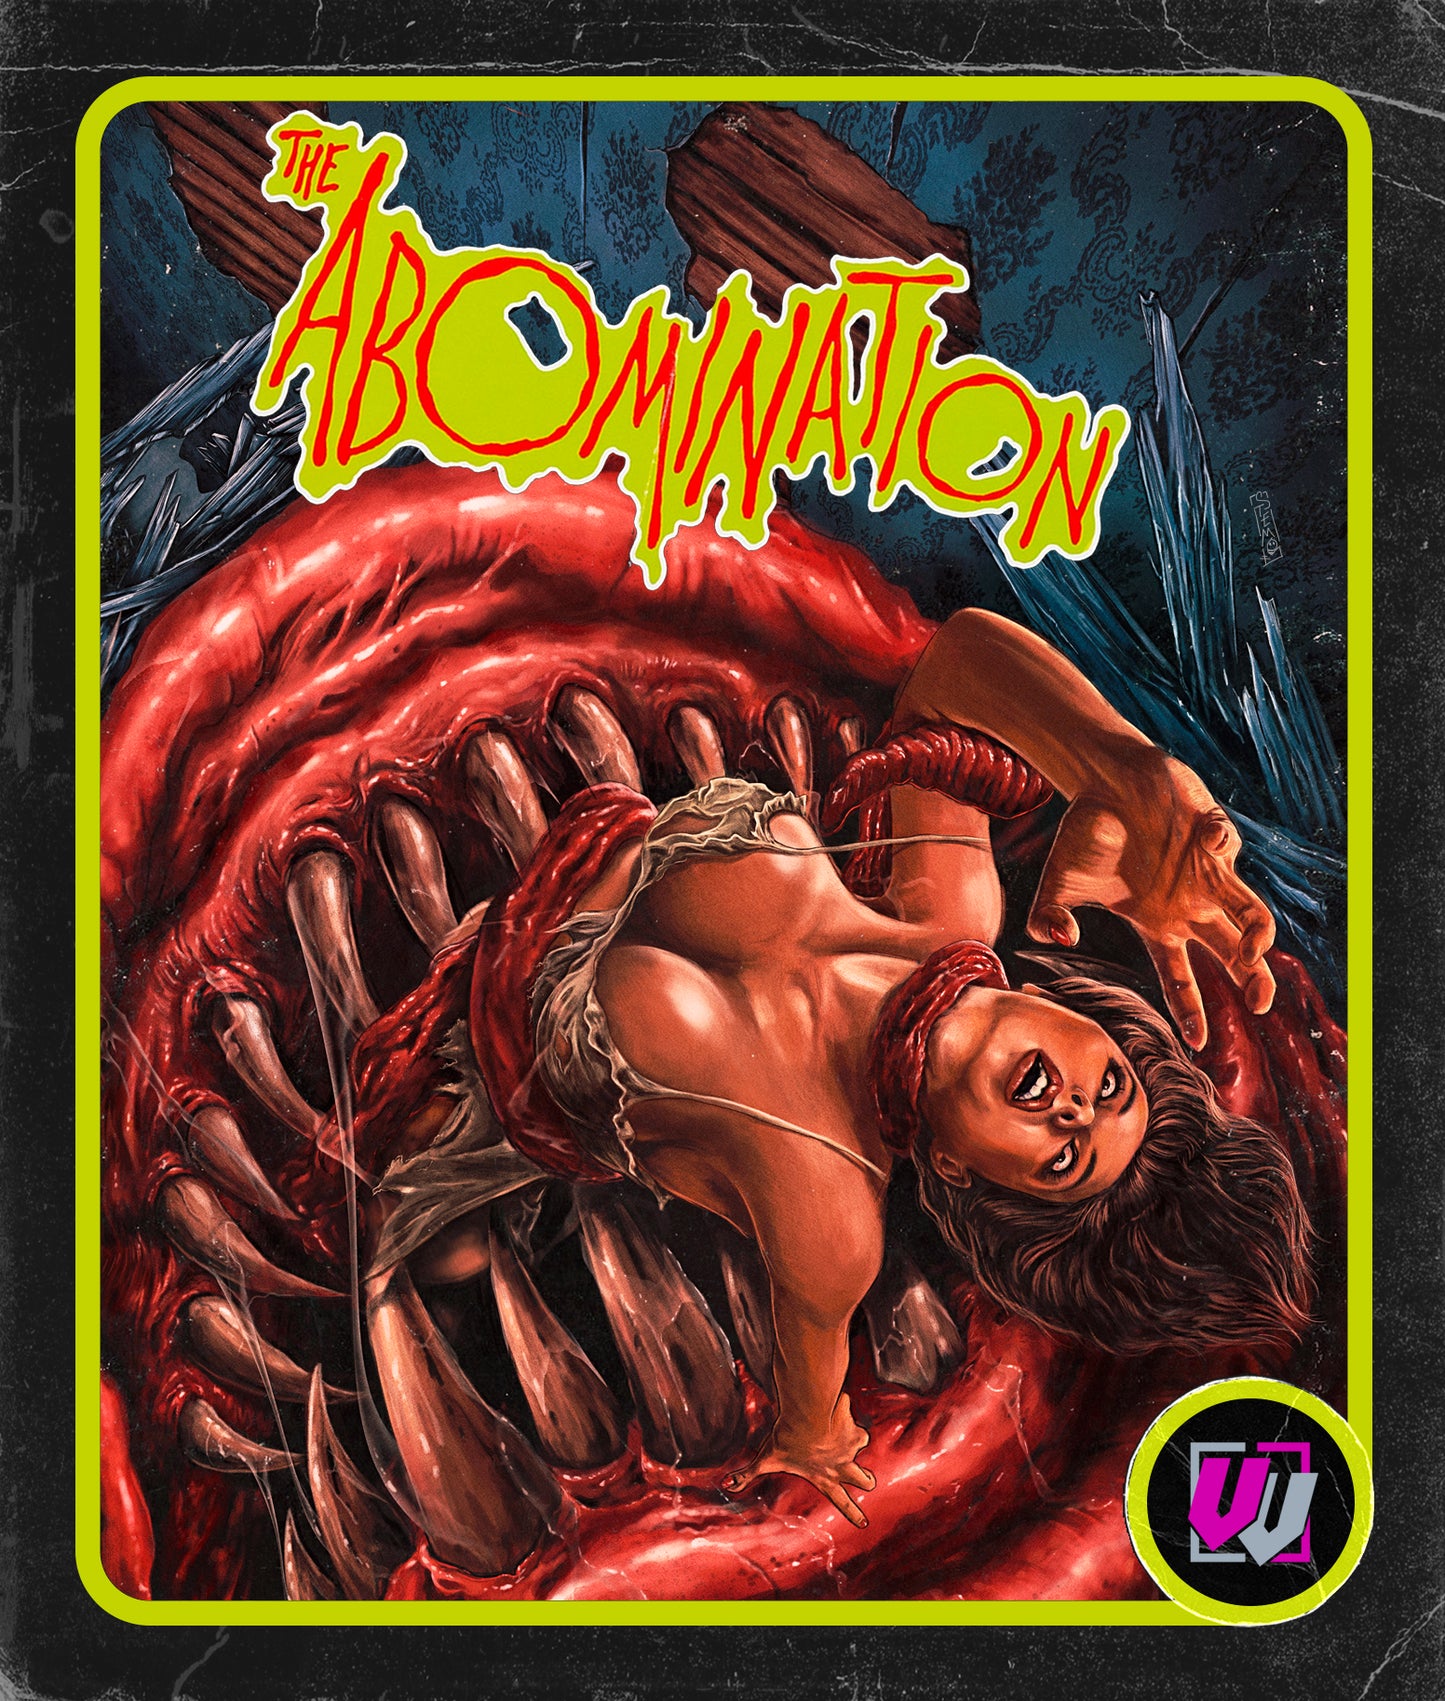 The Abomination Limited Edition Visual Vengeance Blu-Ray [NEW] [SLIPCOVER]